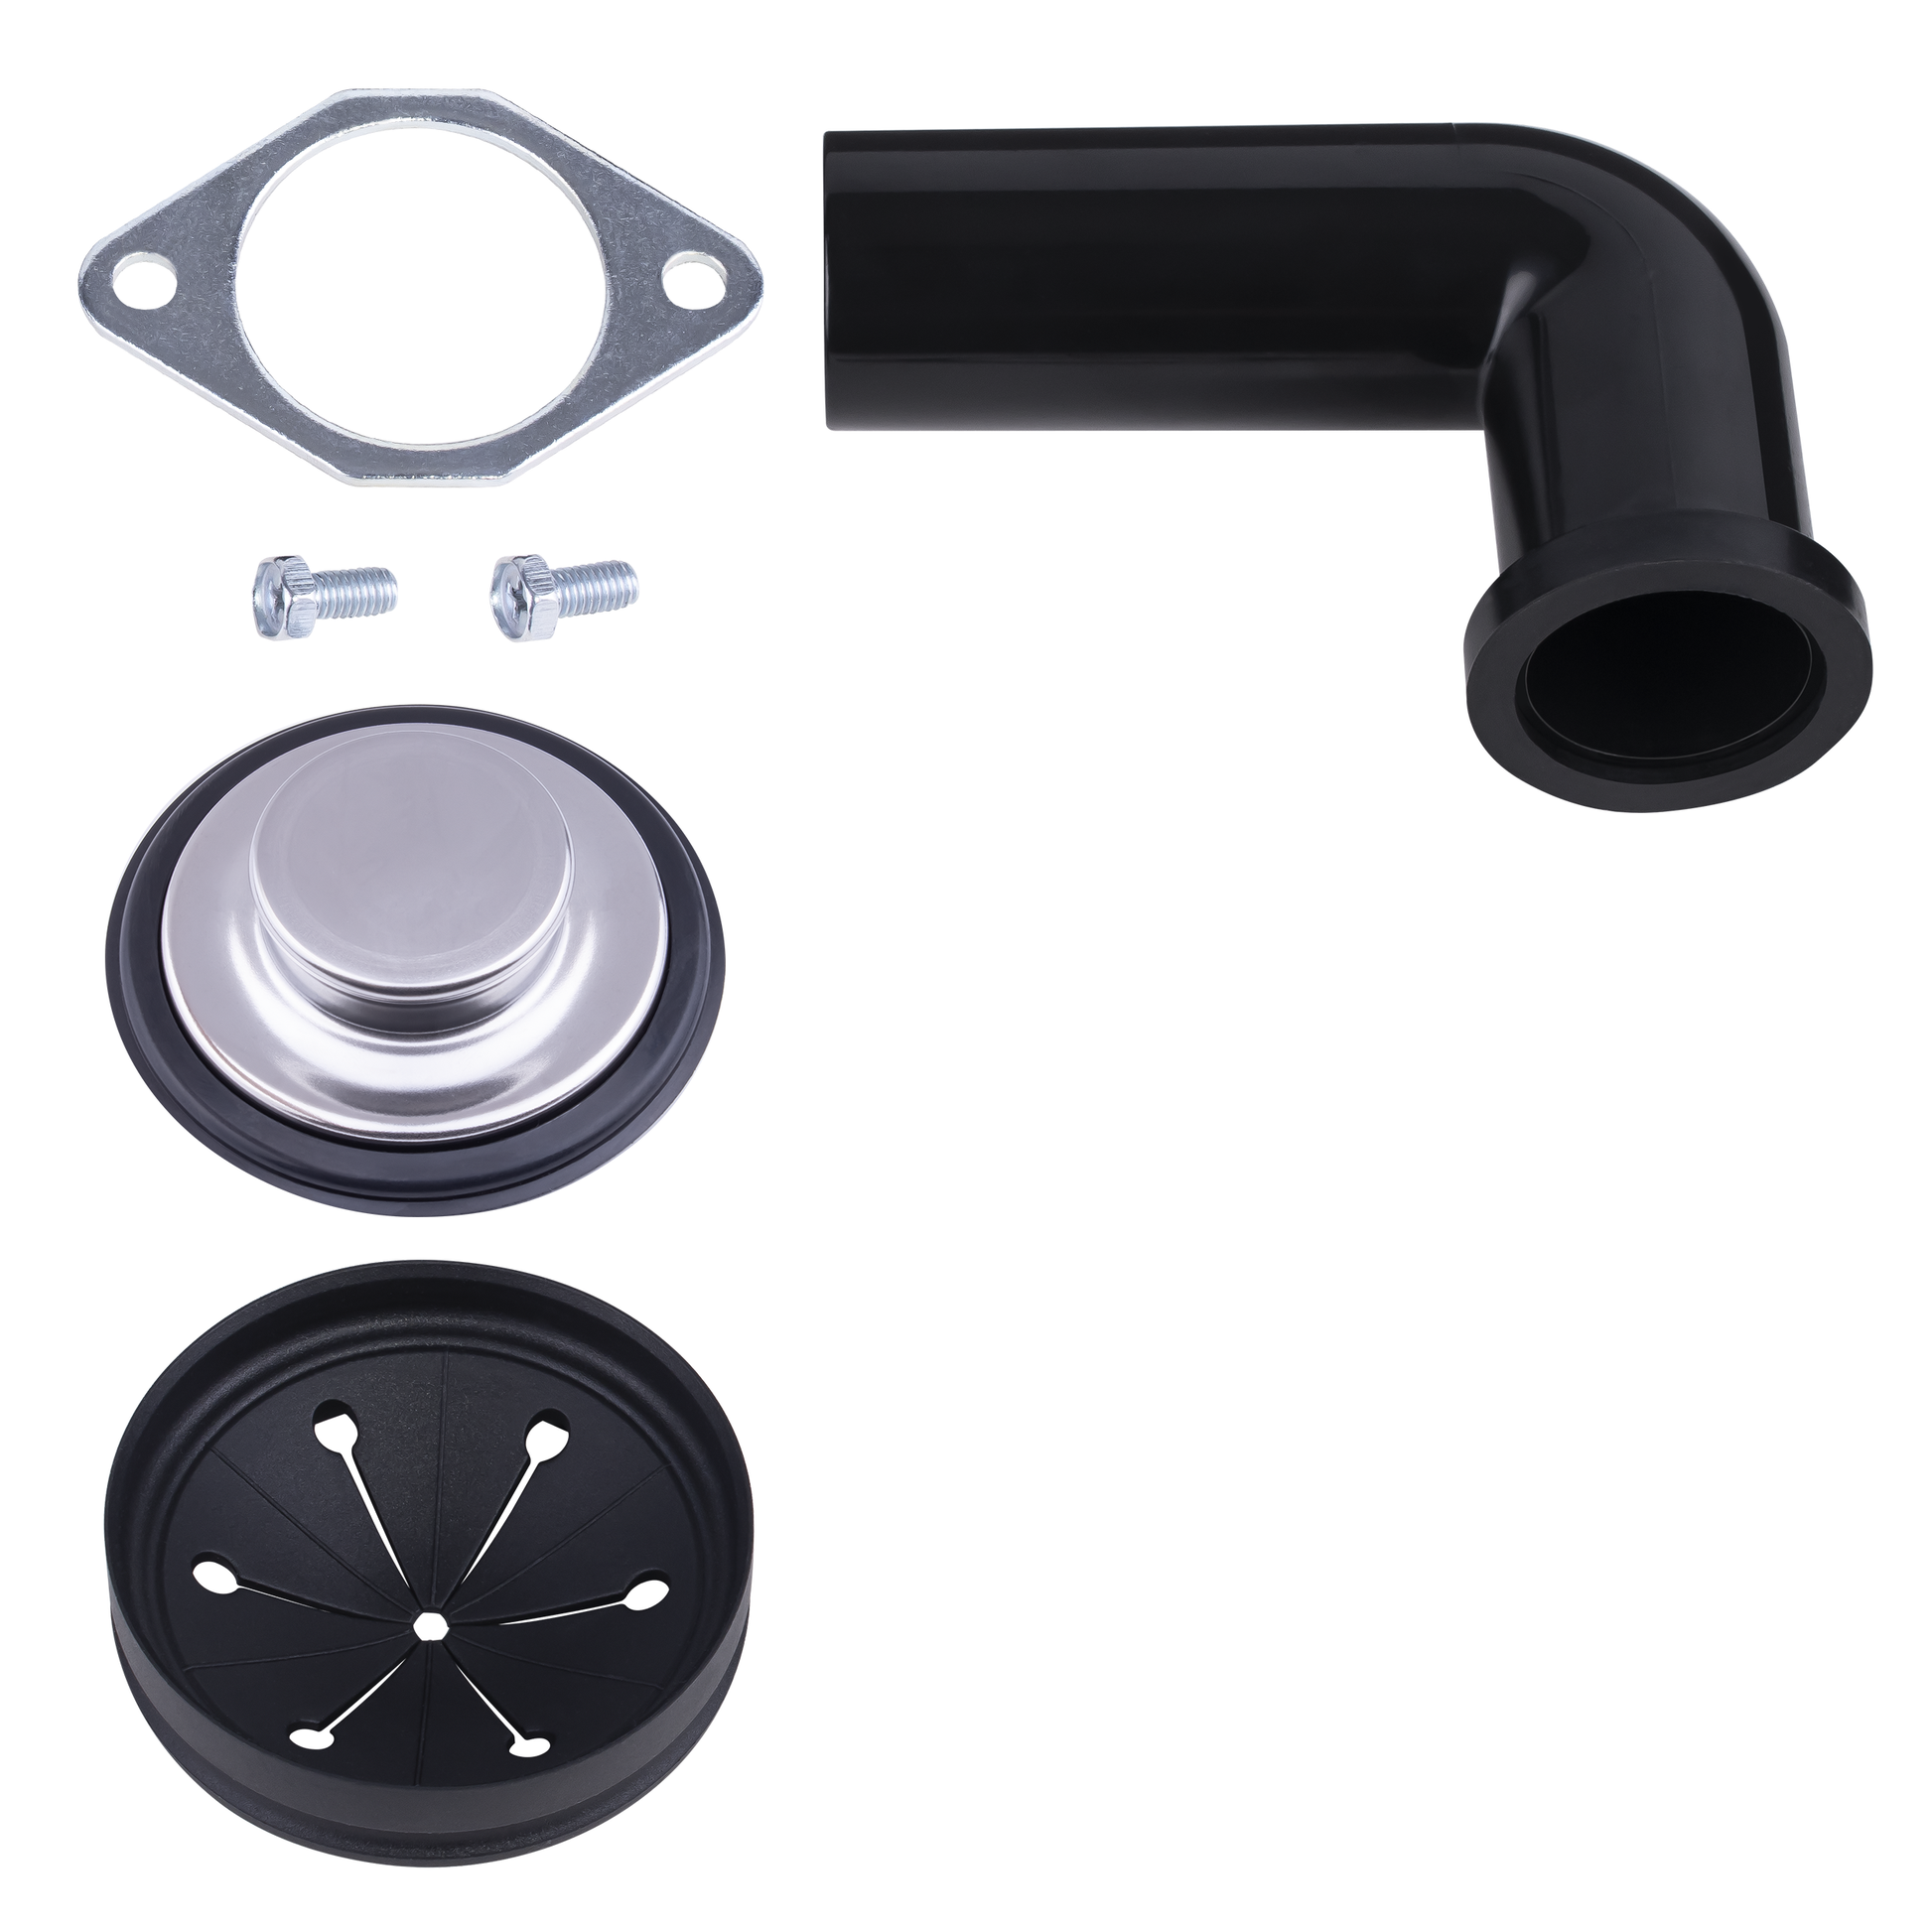 Shows the parts included in package which include the elbow and flange, screws, stainless stopper, and removable splash guard.